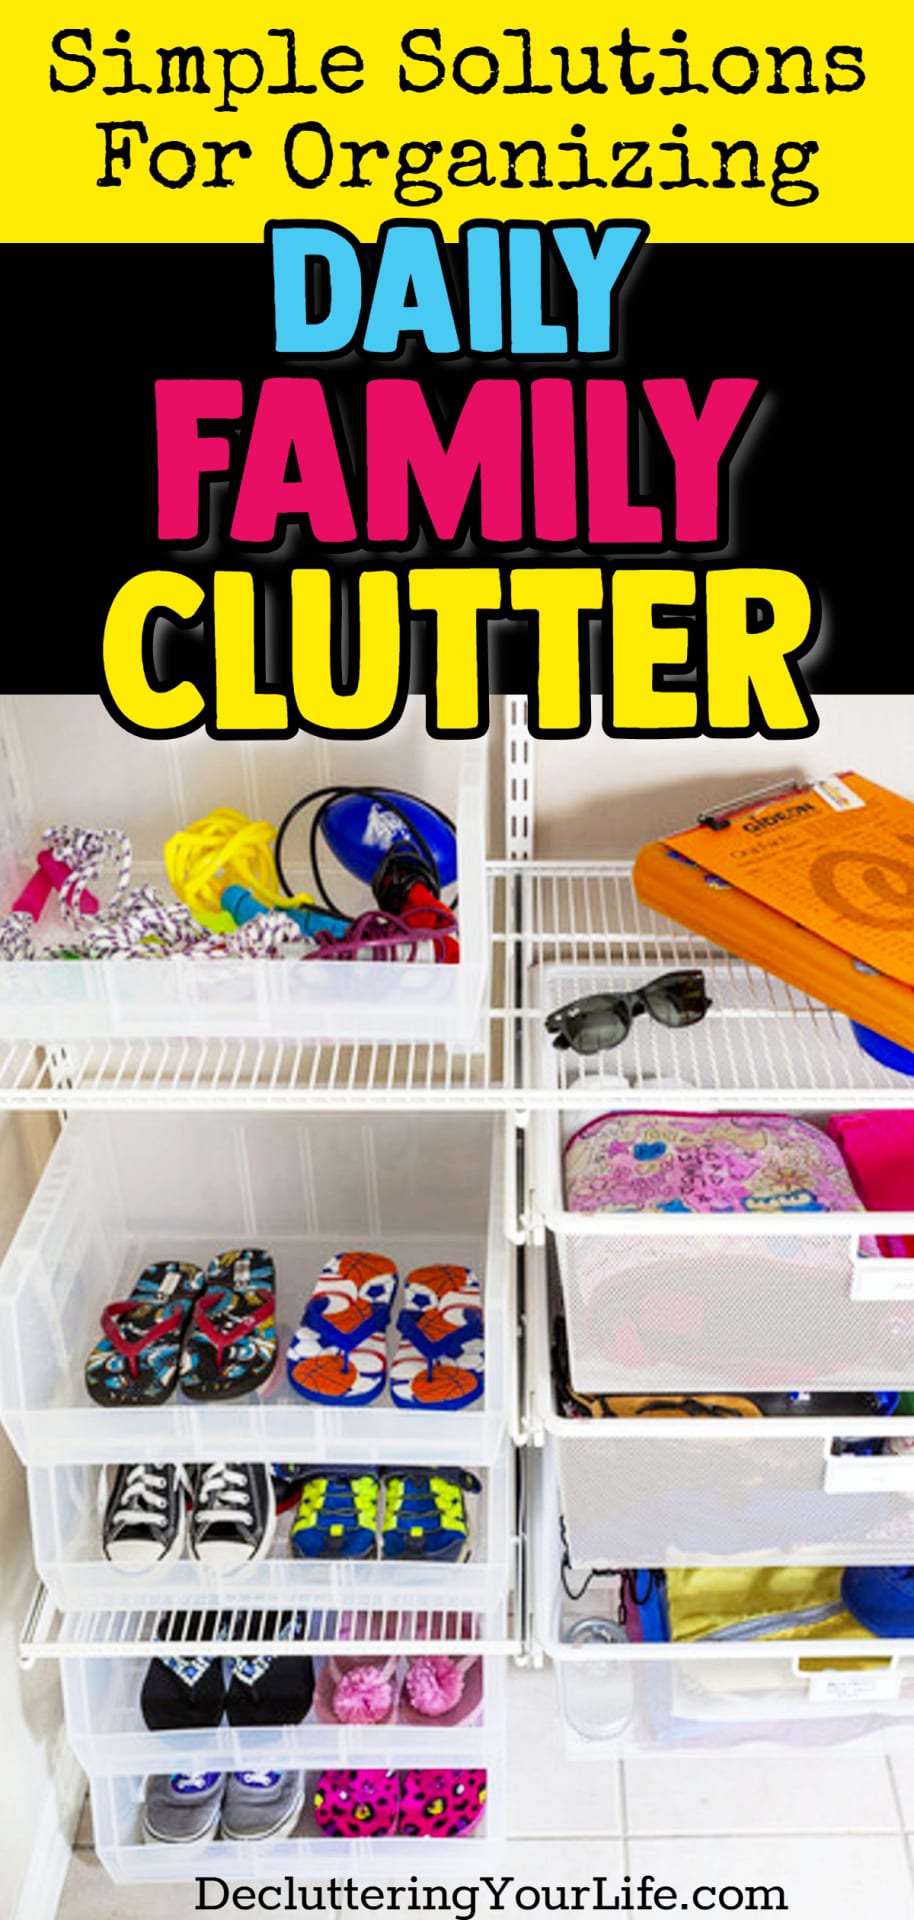 Such a Simple Solution to UNclutter Your Home! Getting organized and STAYING organized with kids is NO JOKE! Here’s a borderline GENIUS home organization hack: create a clutter drop zone area for your family!